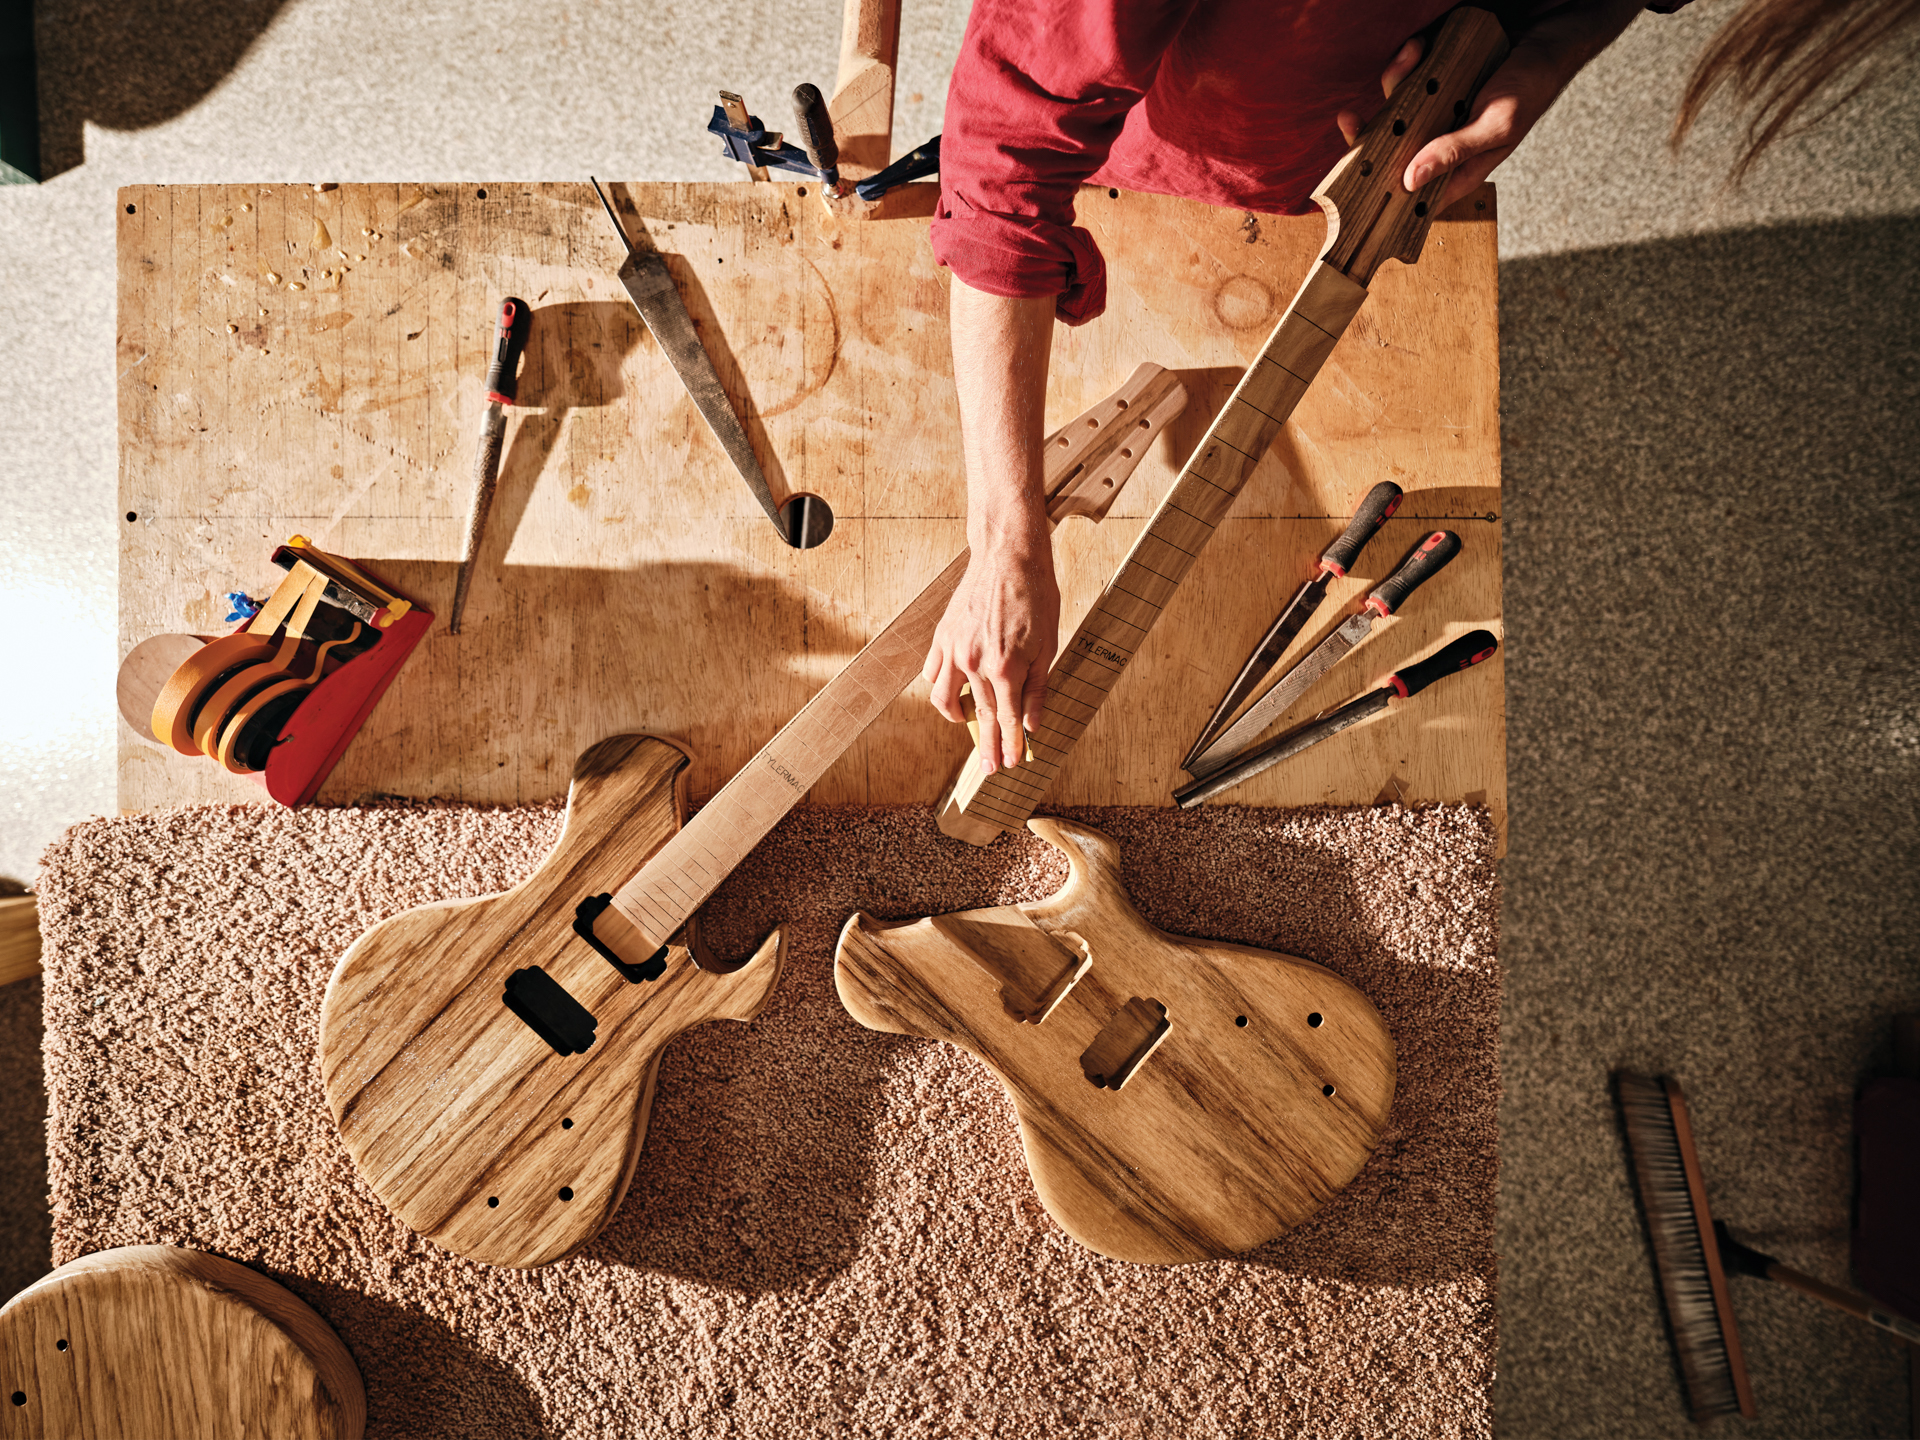 Local Musician Handcrafts Wooden Electric Guitars - Gulfshore Life